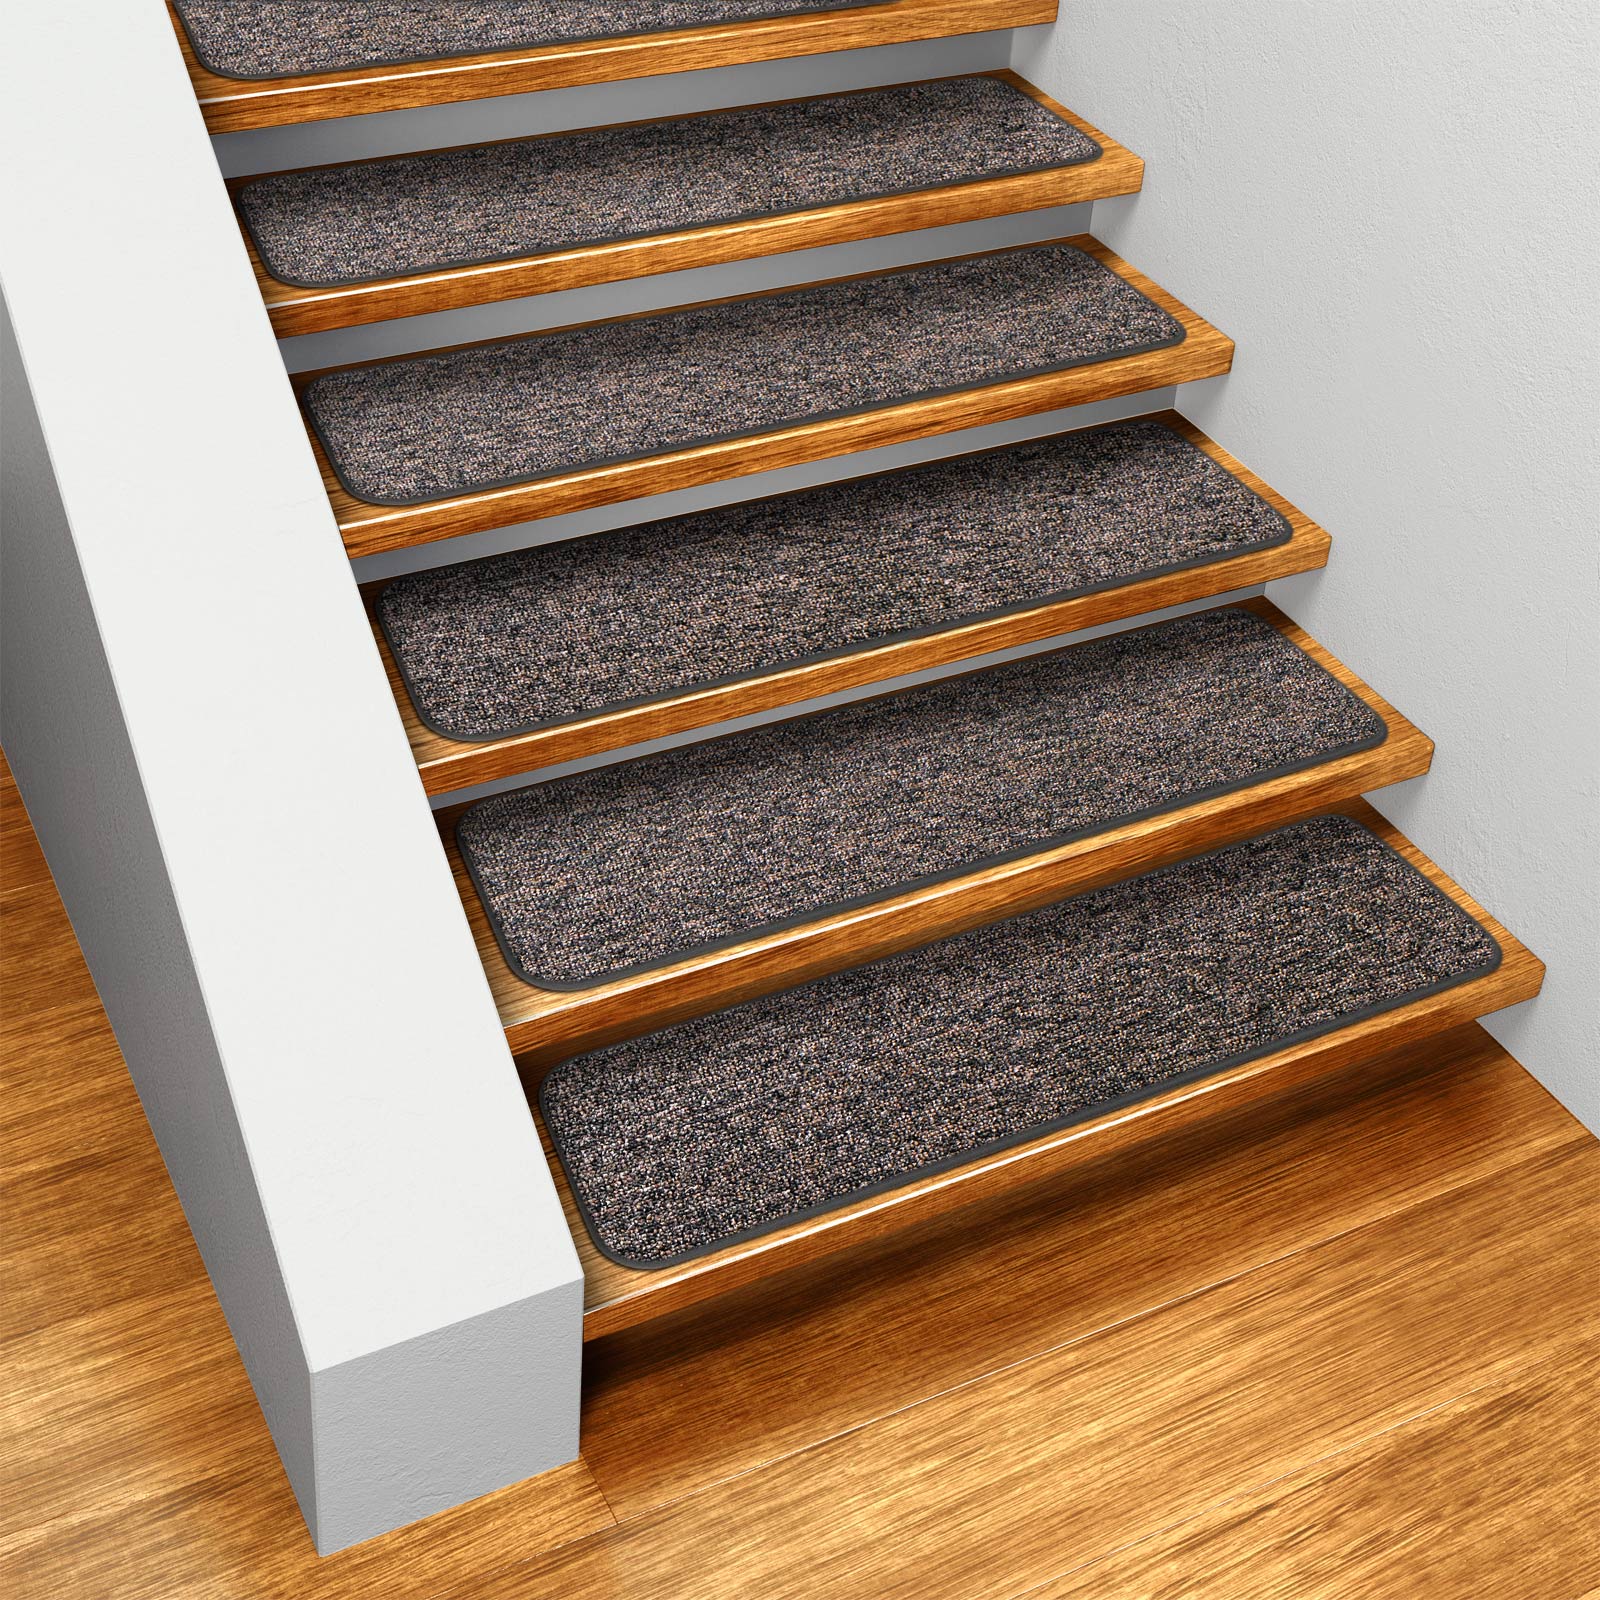 House, Home and More Set of 12 Skid-resistant Carpet Stair Treads - Pebble Gray - 8 In. X 27 In.